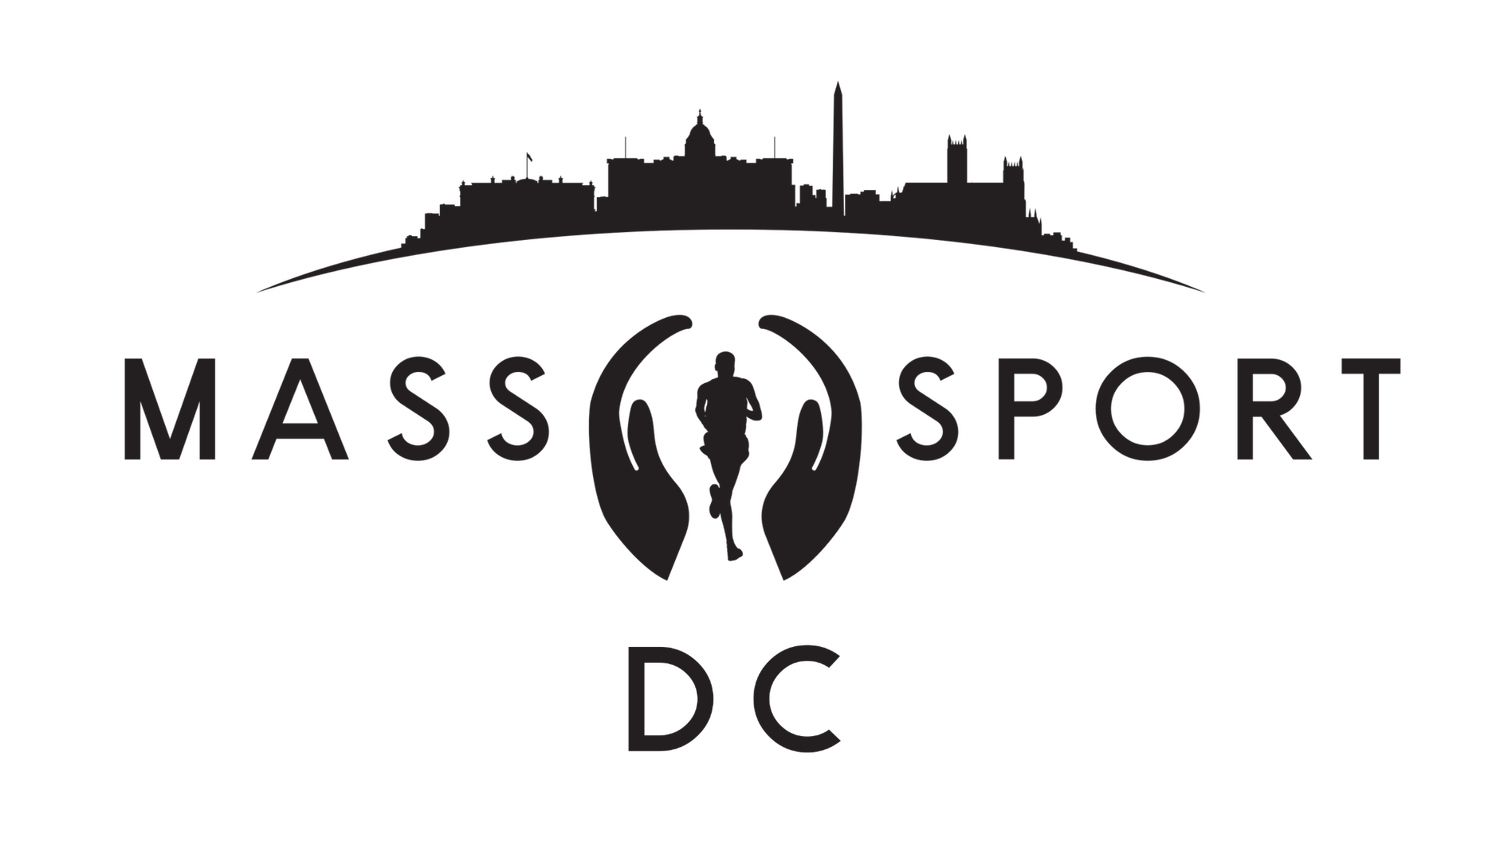 Massosport DC - Sports, Lymphatic, and Medical Massage Therapy